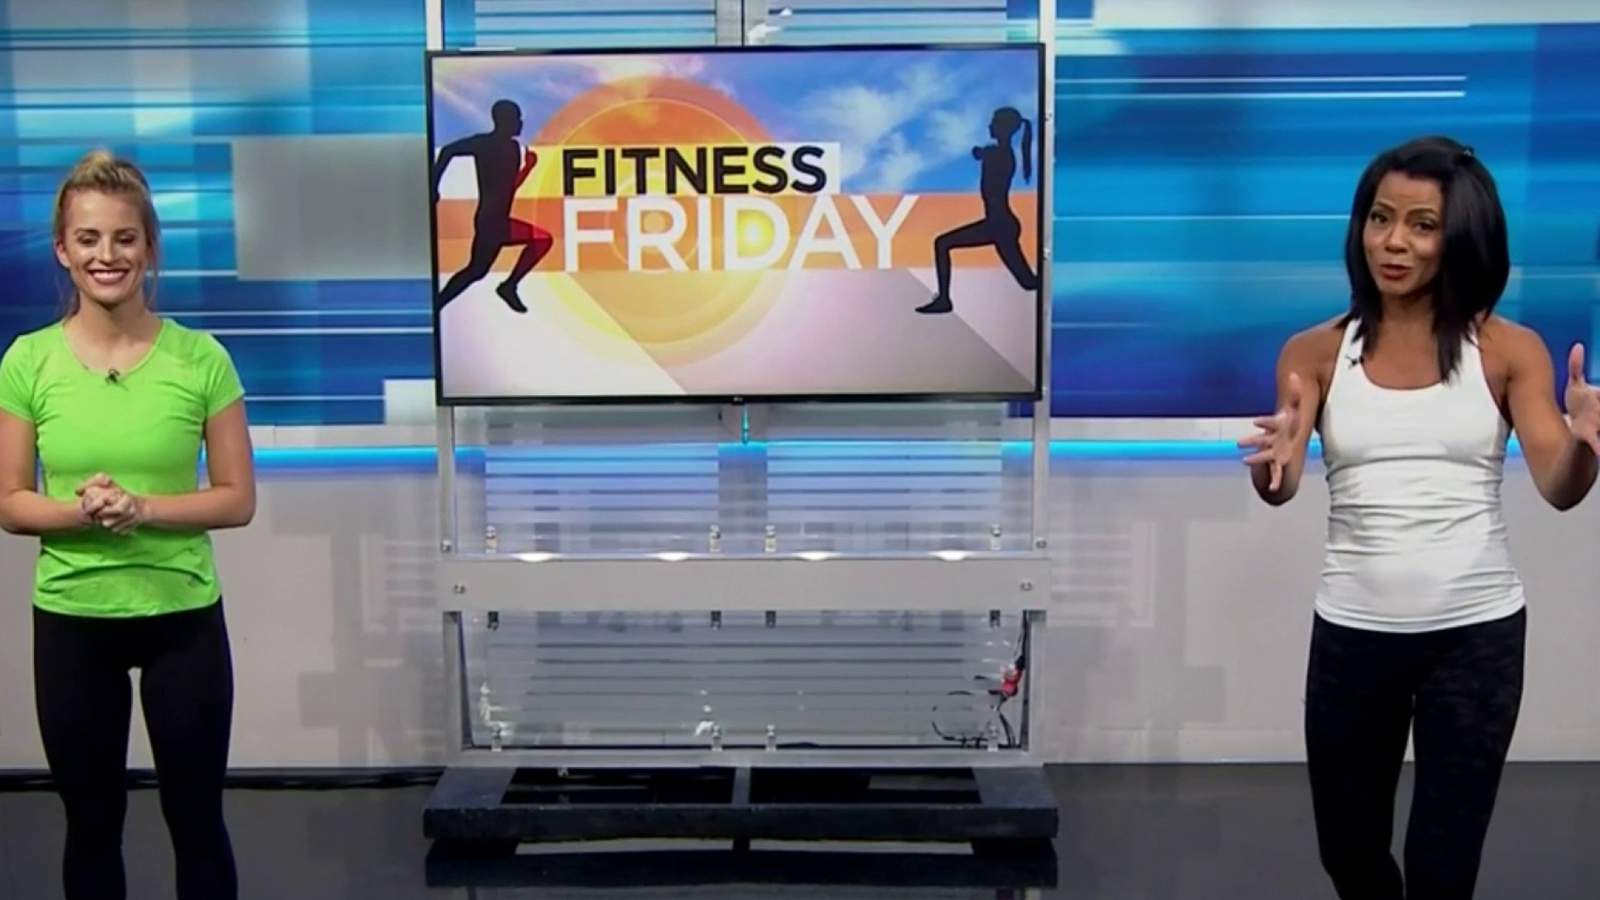 Fitness Friday: Workouts to do at home